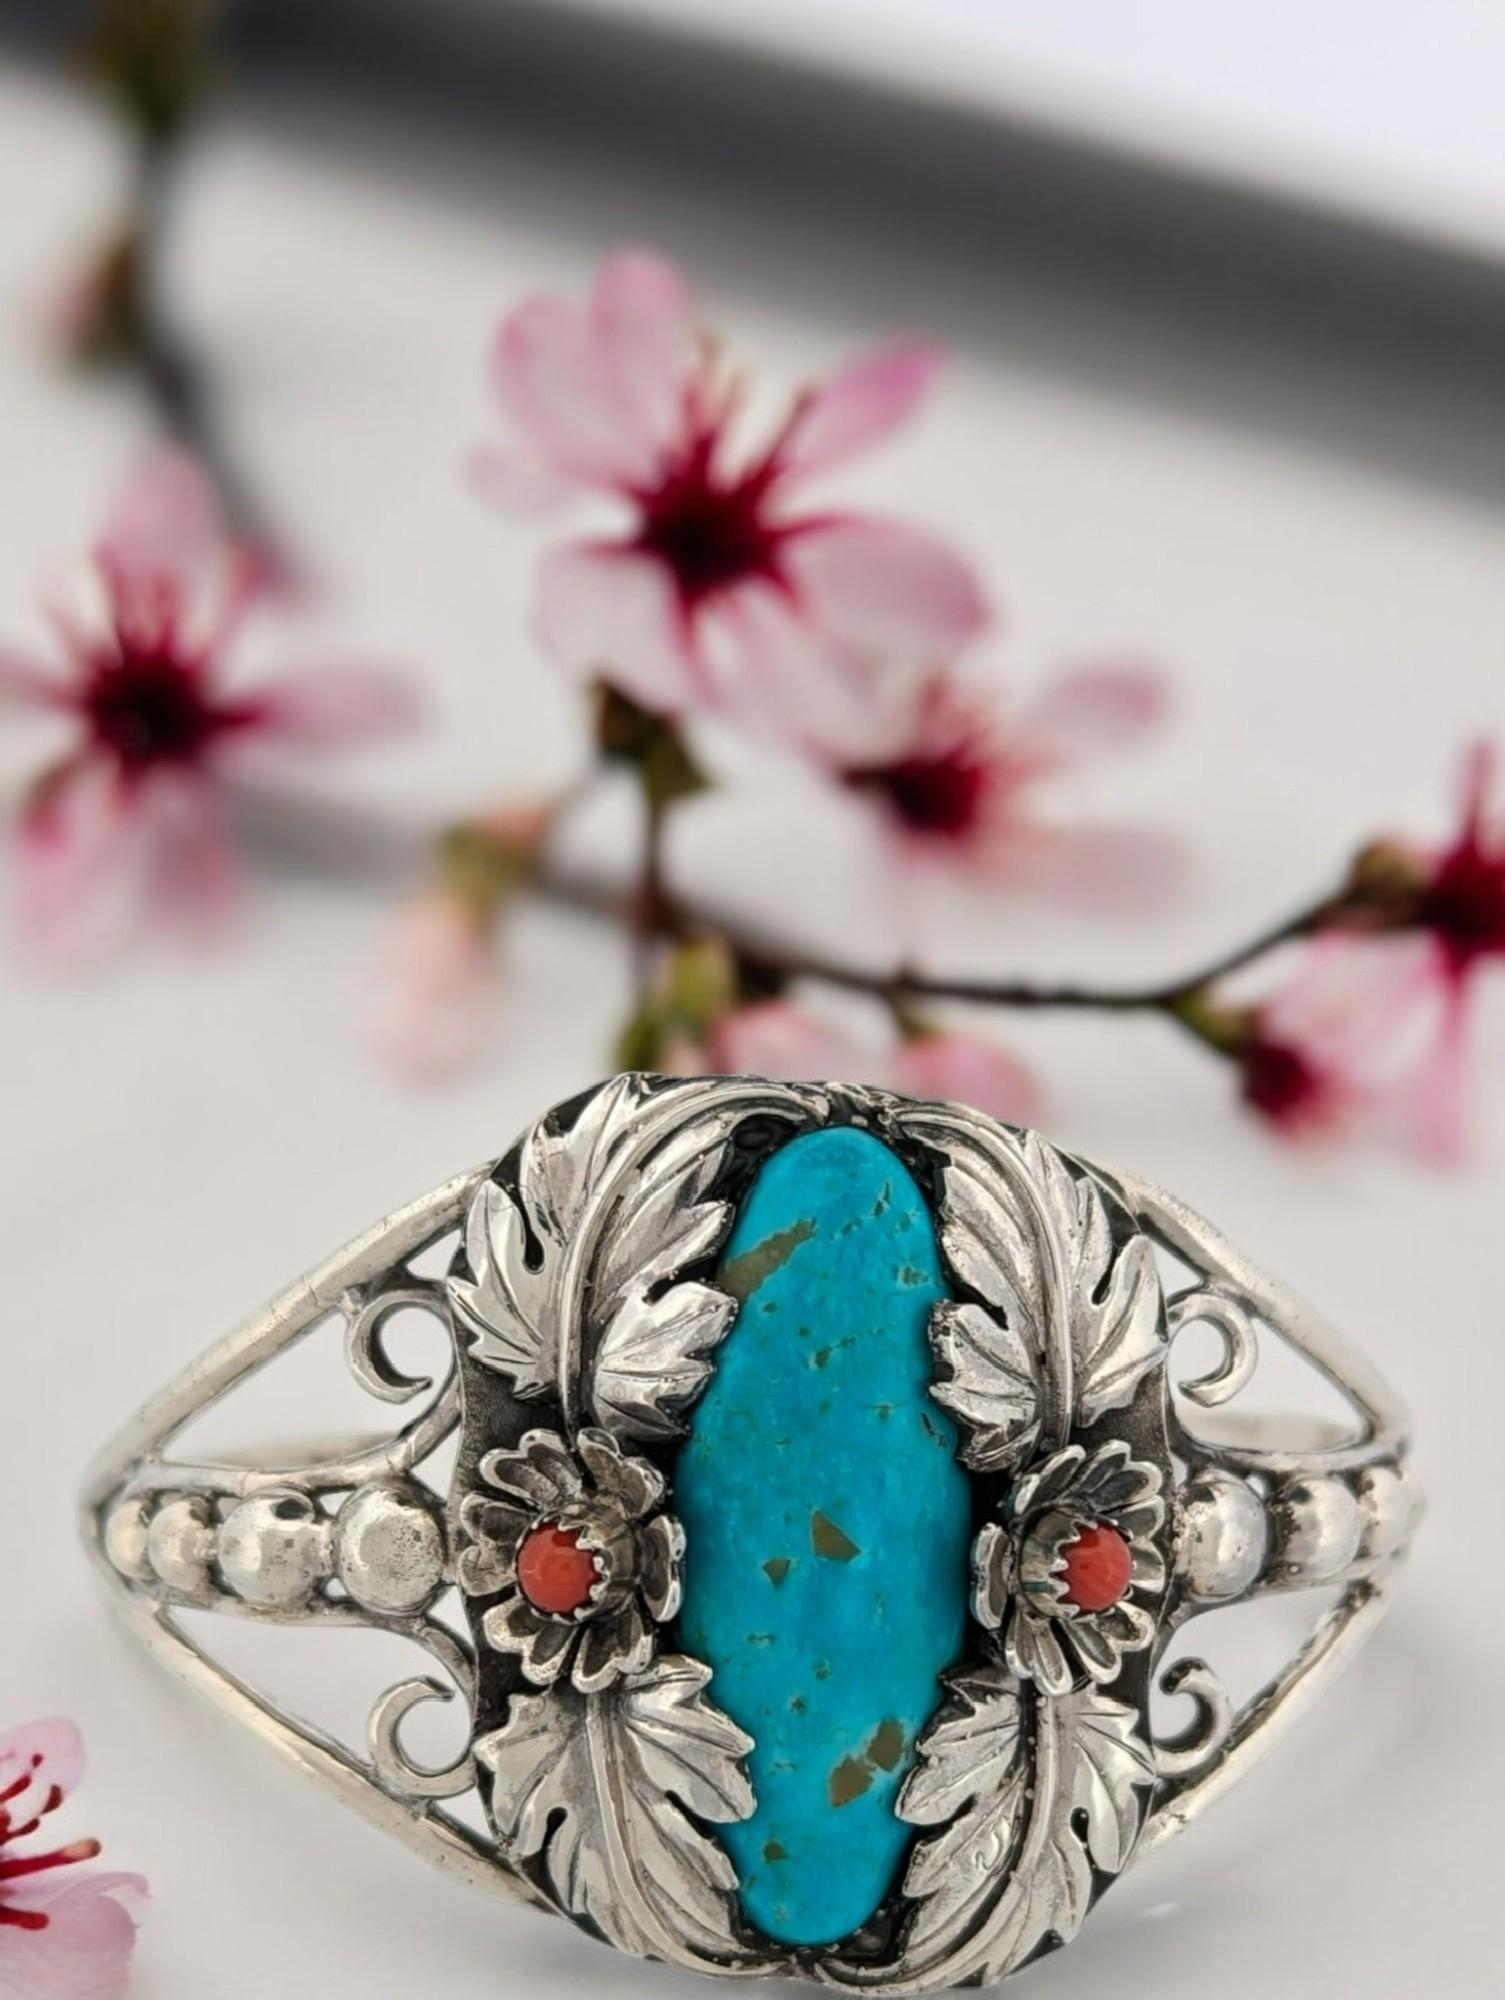 This captivating cuff bracelet is a testament to the artistry of Robert Drozd. Crafted from gleaming sterling silver, the bracelet features vibrant coral accents that add a touch of whimsy. The centerpiece, however, is the stunning Kingman turquoise